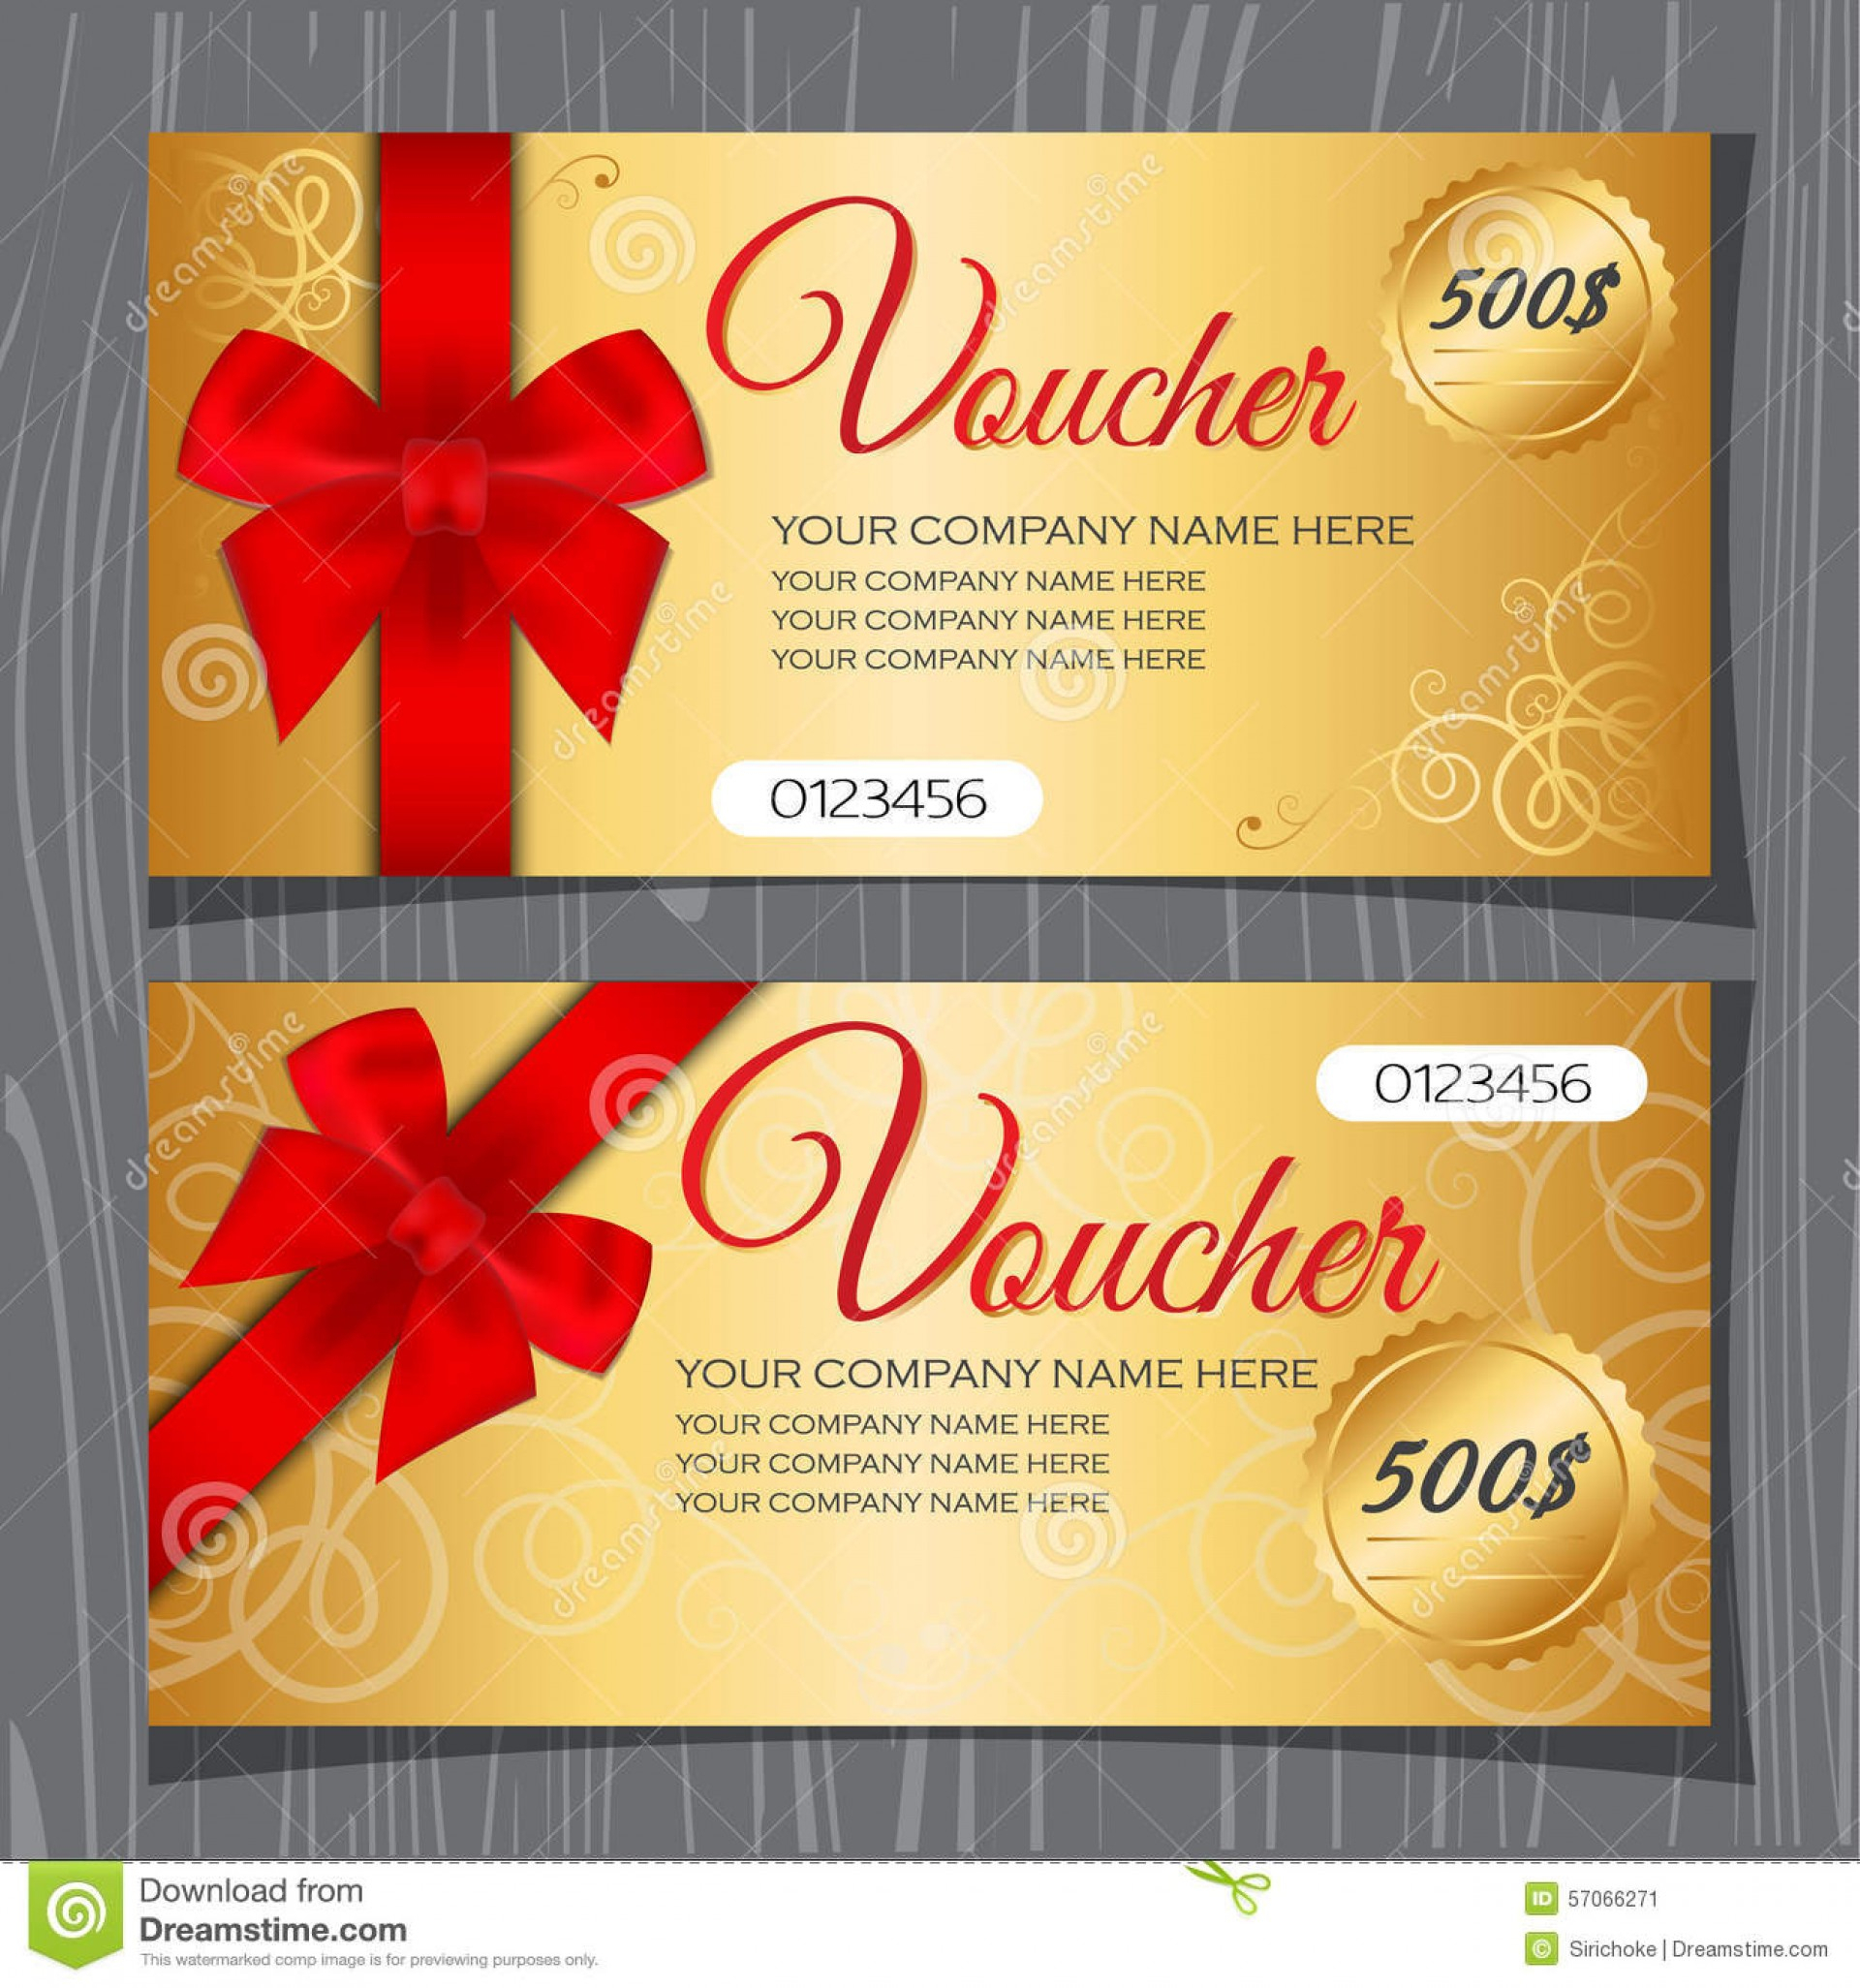 016 Bday Travel Gift Certificate Template Stirring Ideas Pertaining To Free Travel Gift Certificate Template